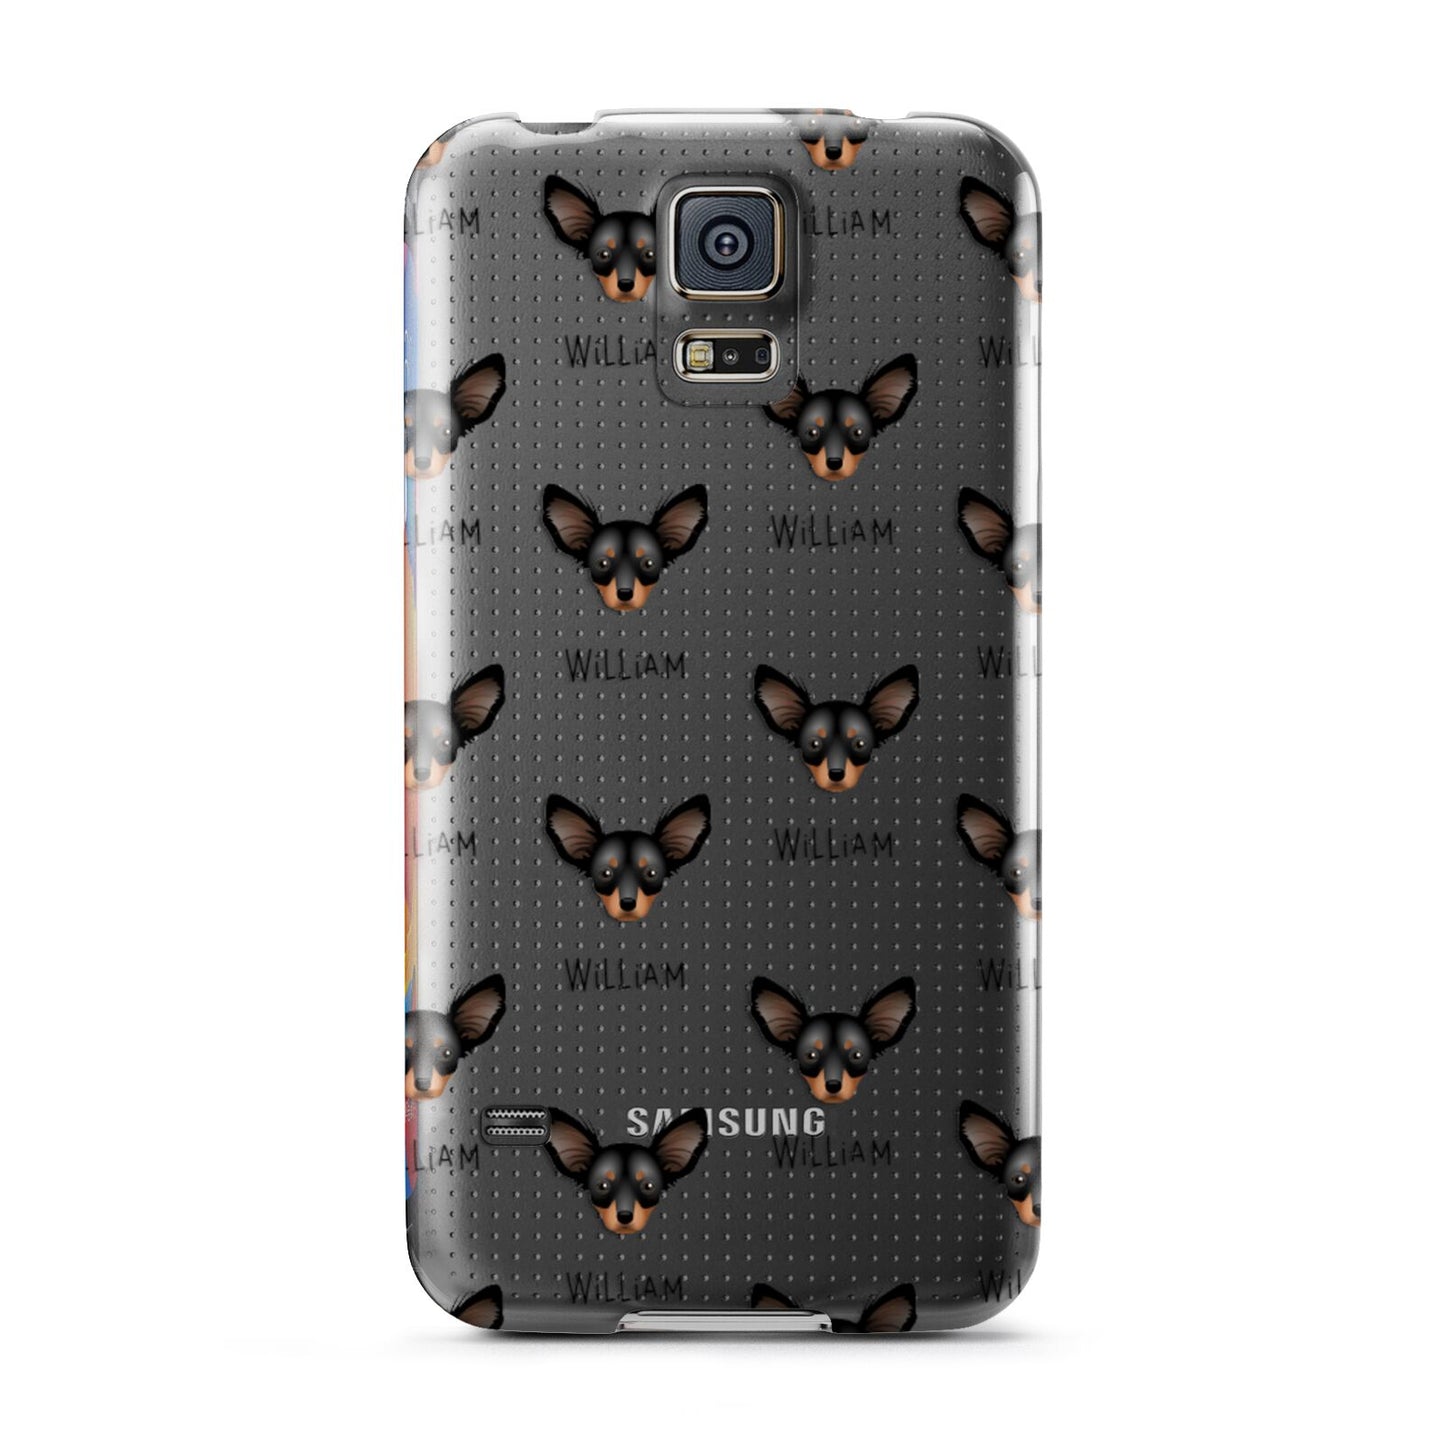 Russian Toy Icon with Name Samsung Galaxy S5 Case